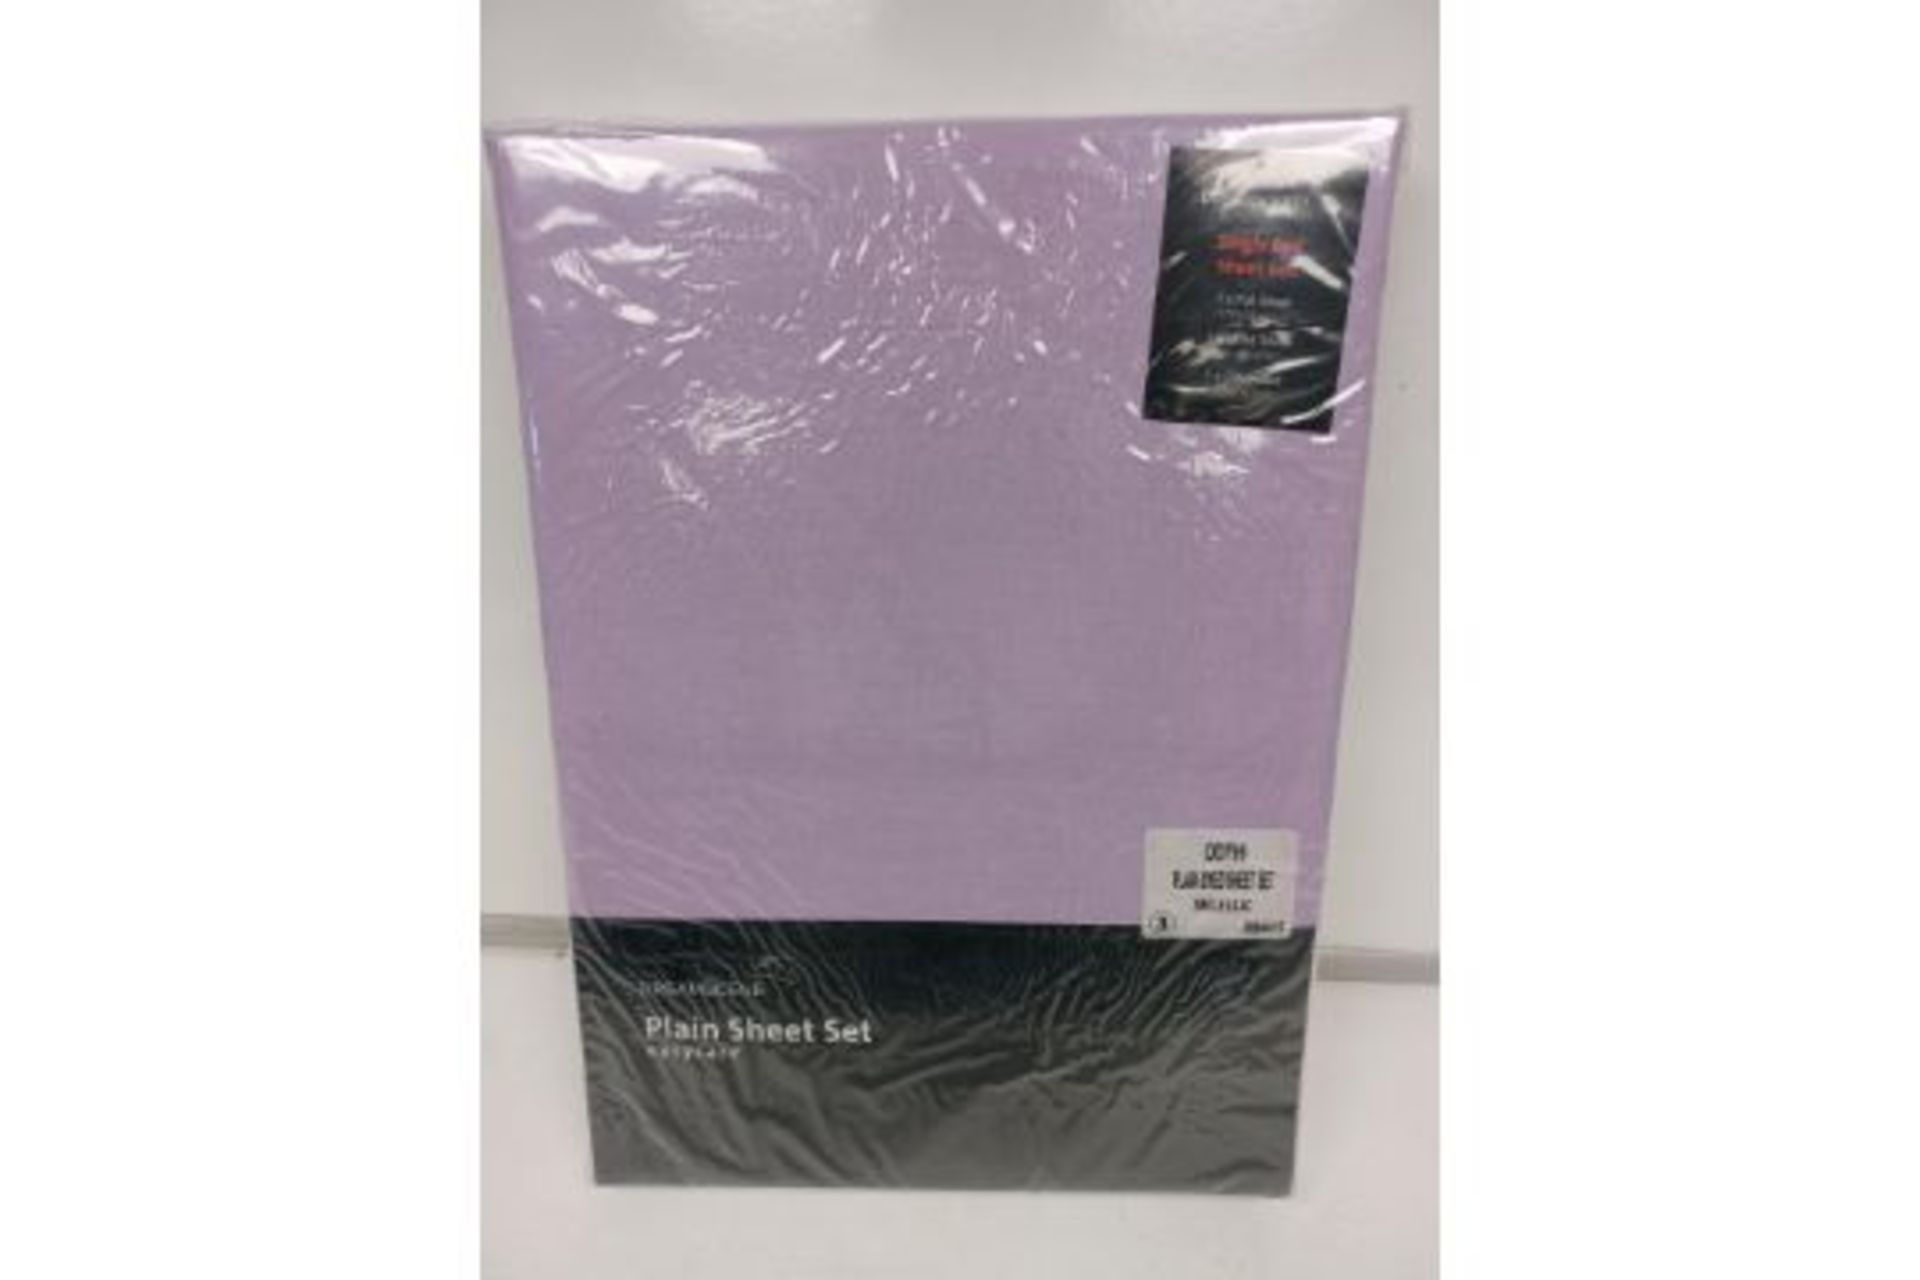 18 X BRAND NEW DREAMSCENE SINGLE BEDDING SHEET SETS INCLUDING FLAT SHEET, FITTED SHEET AND